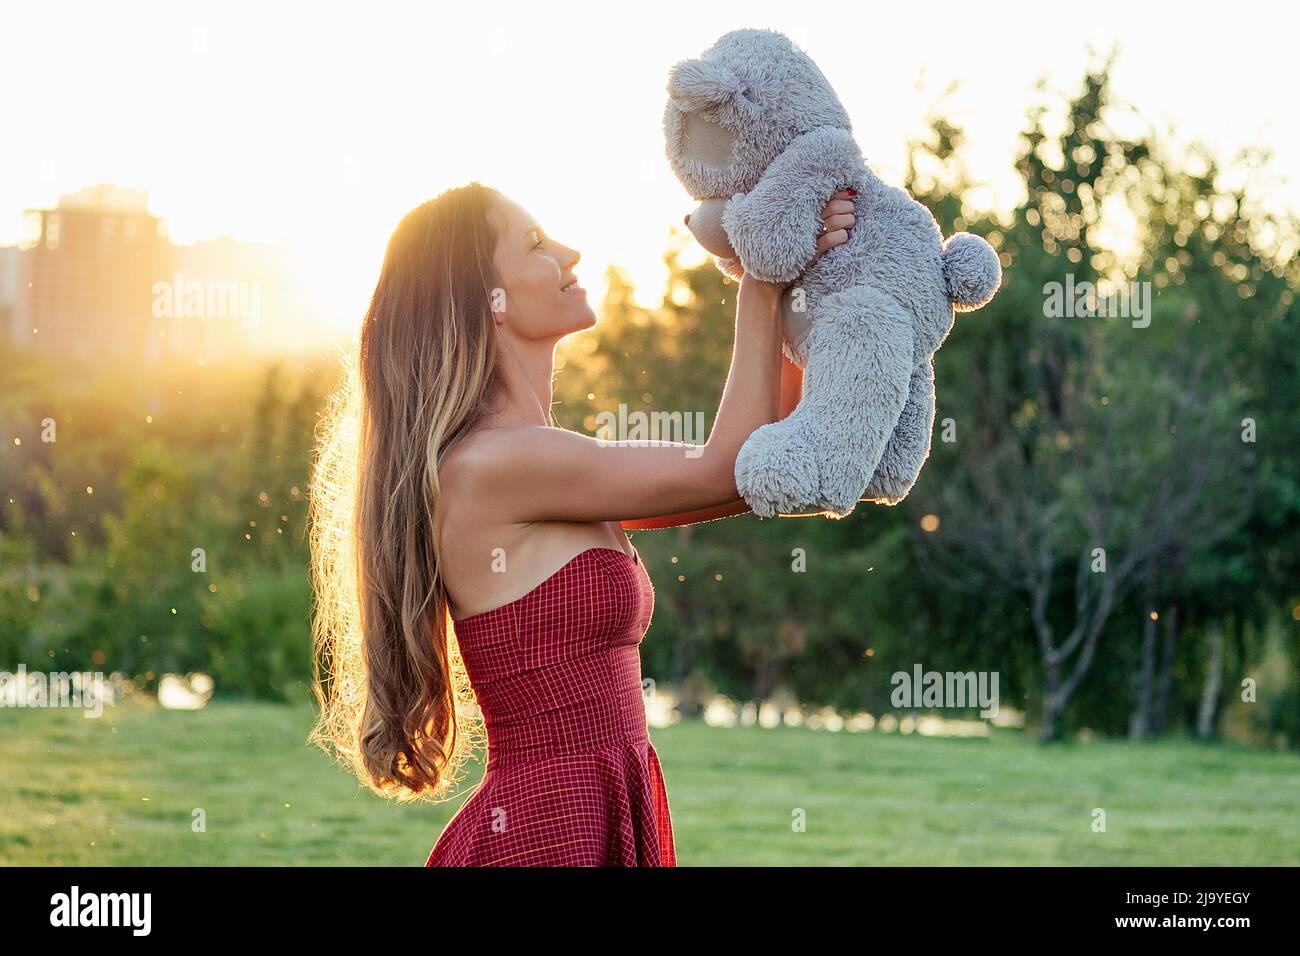 cute long-haired tanned woman enigmatic smile holding a gray teddy bear toy in hands in the park trees background Stock Photo